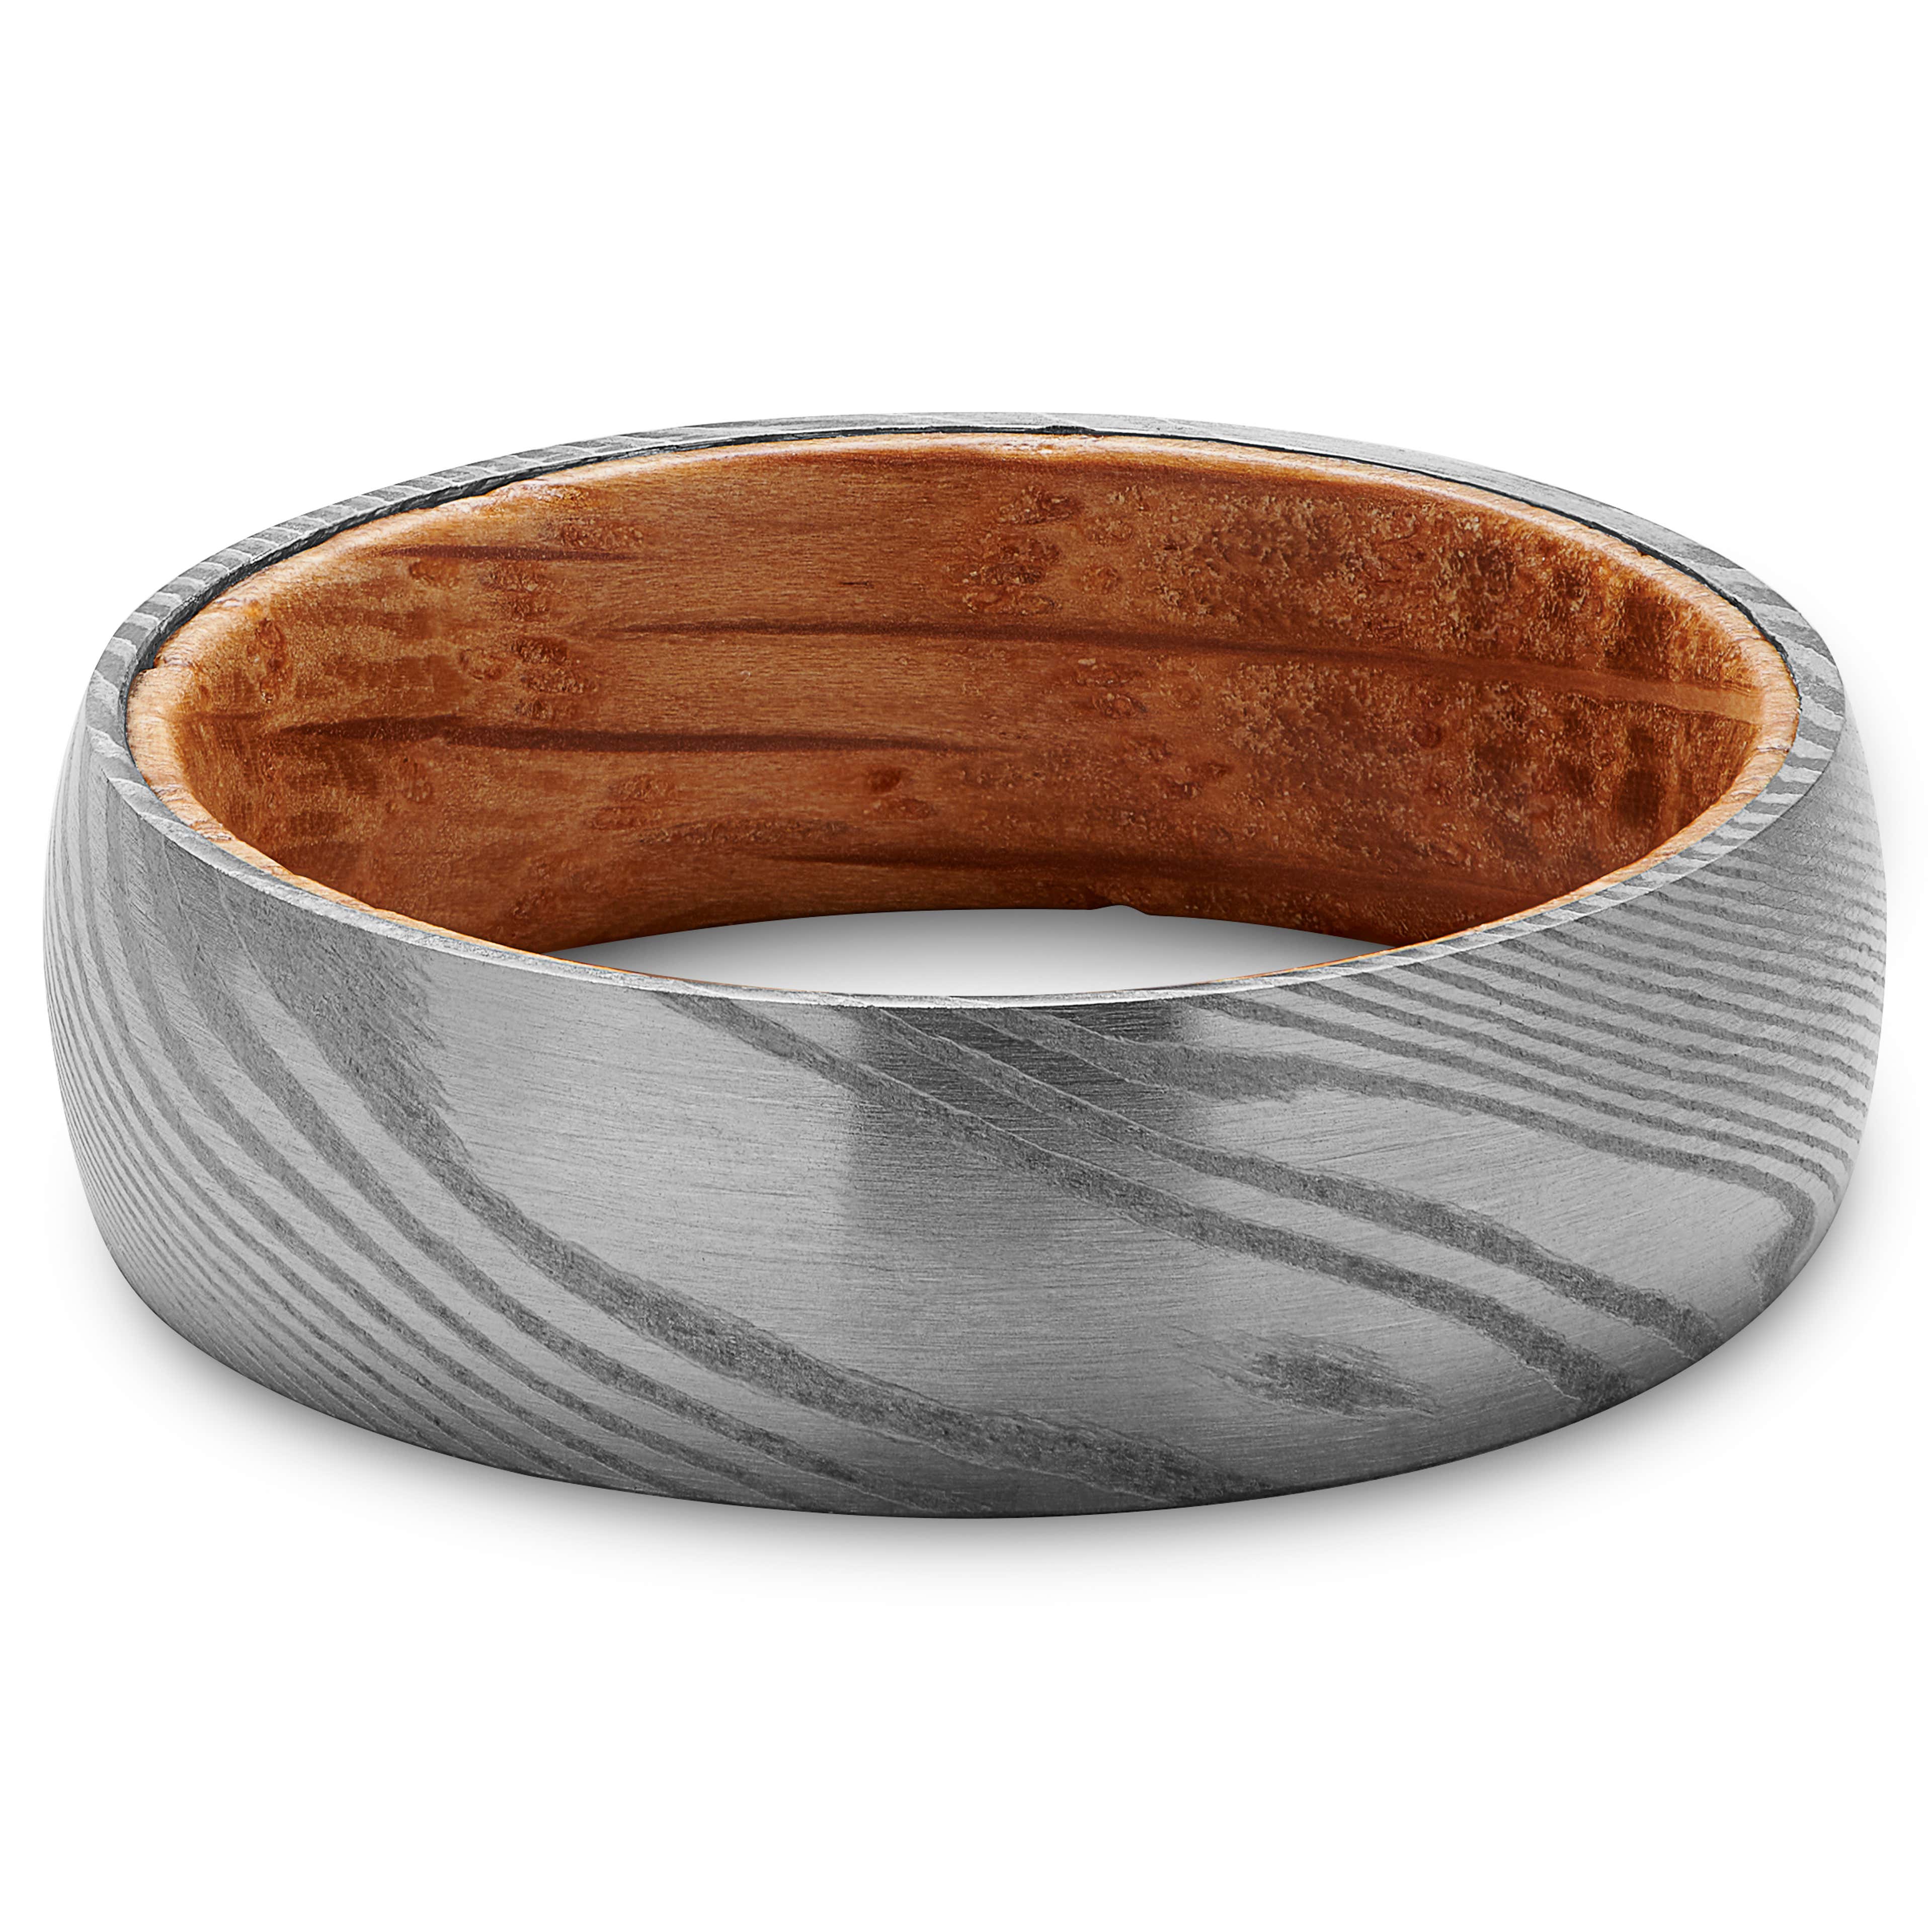 Tyson Damascus Steel and Wood Ring - 2 - hover gallery